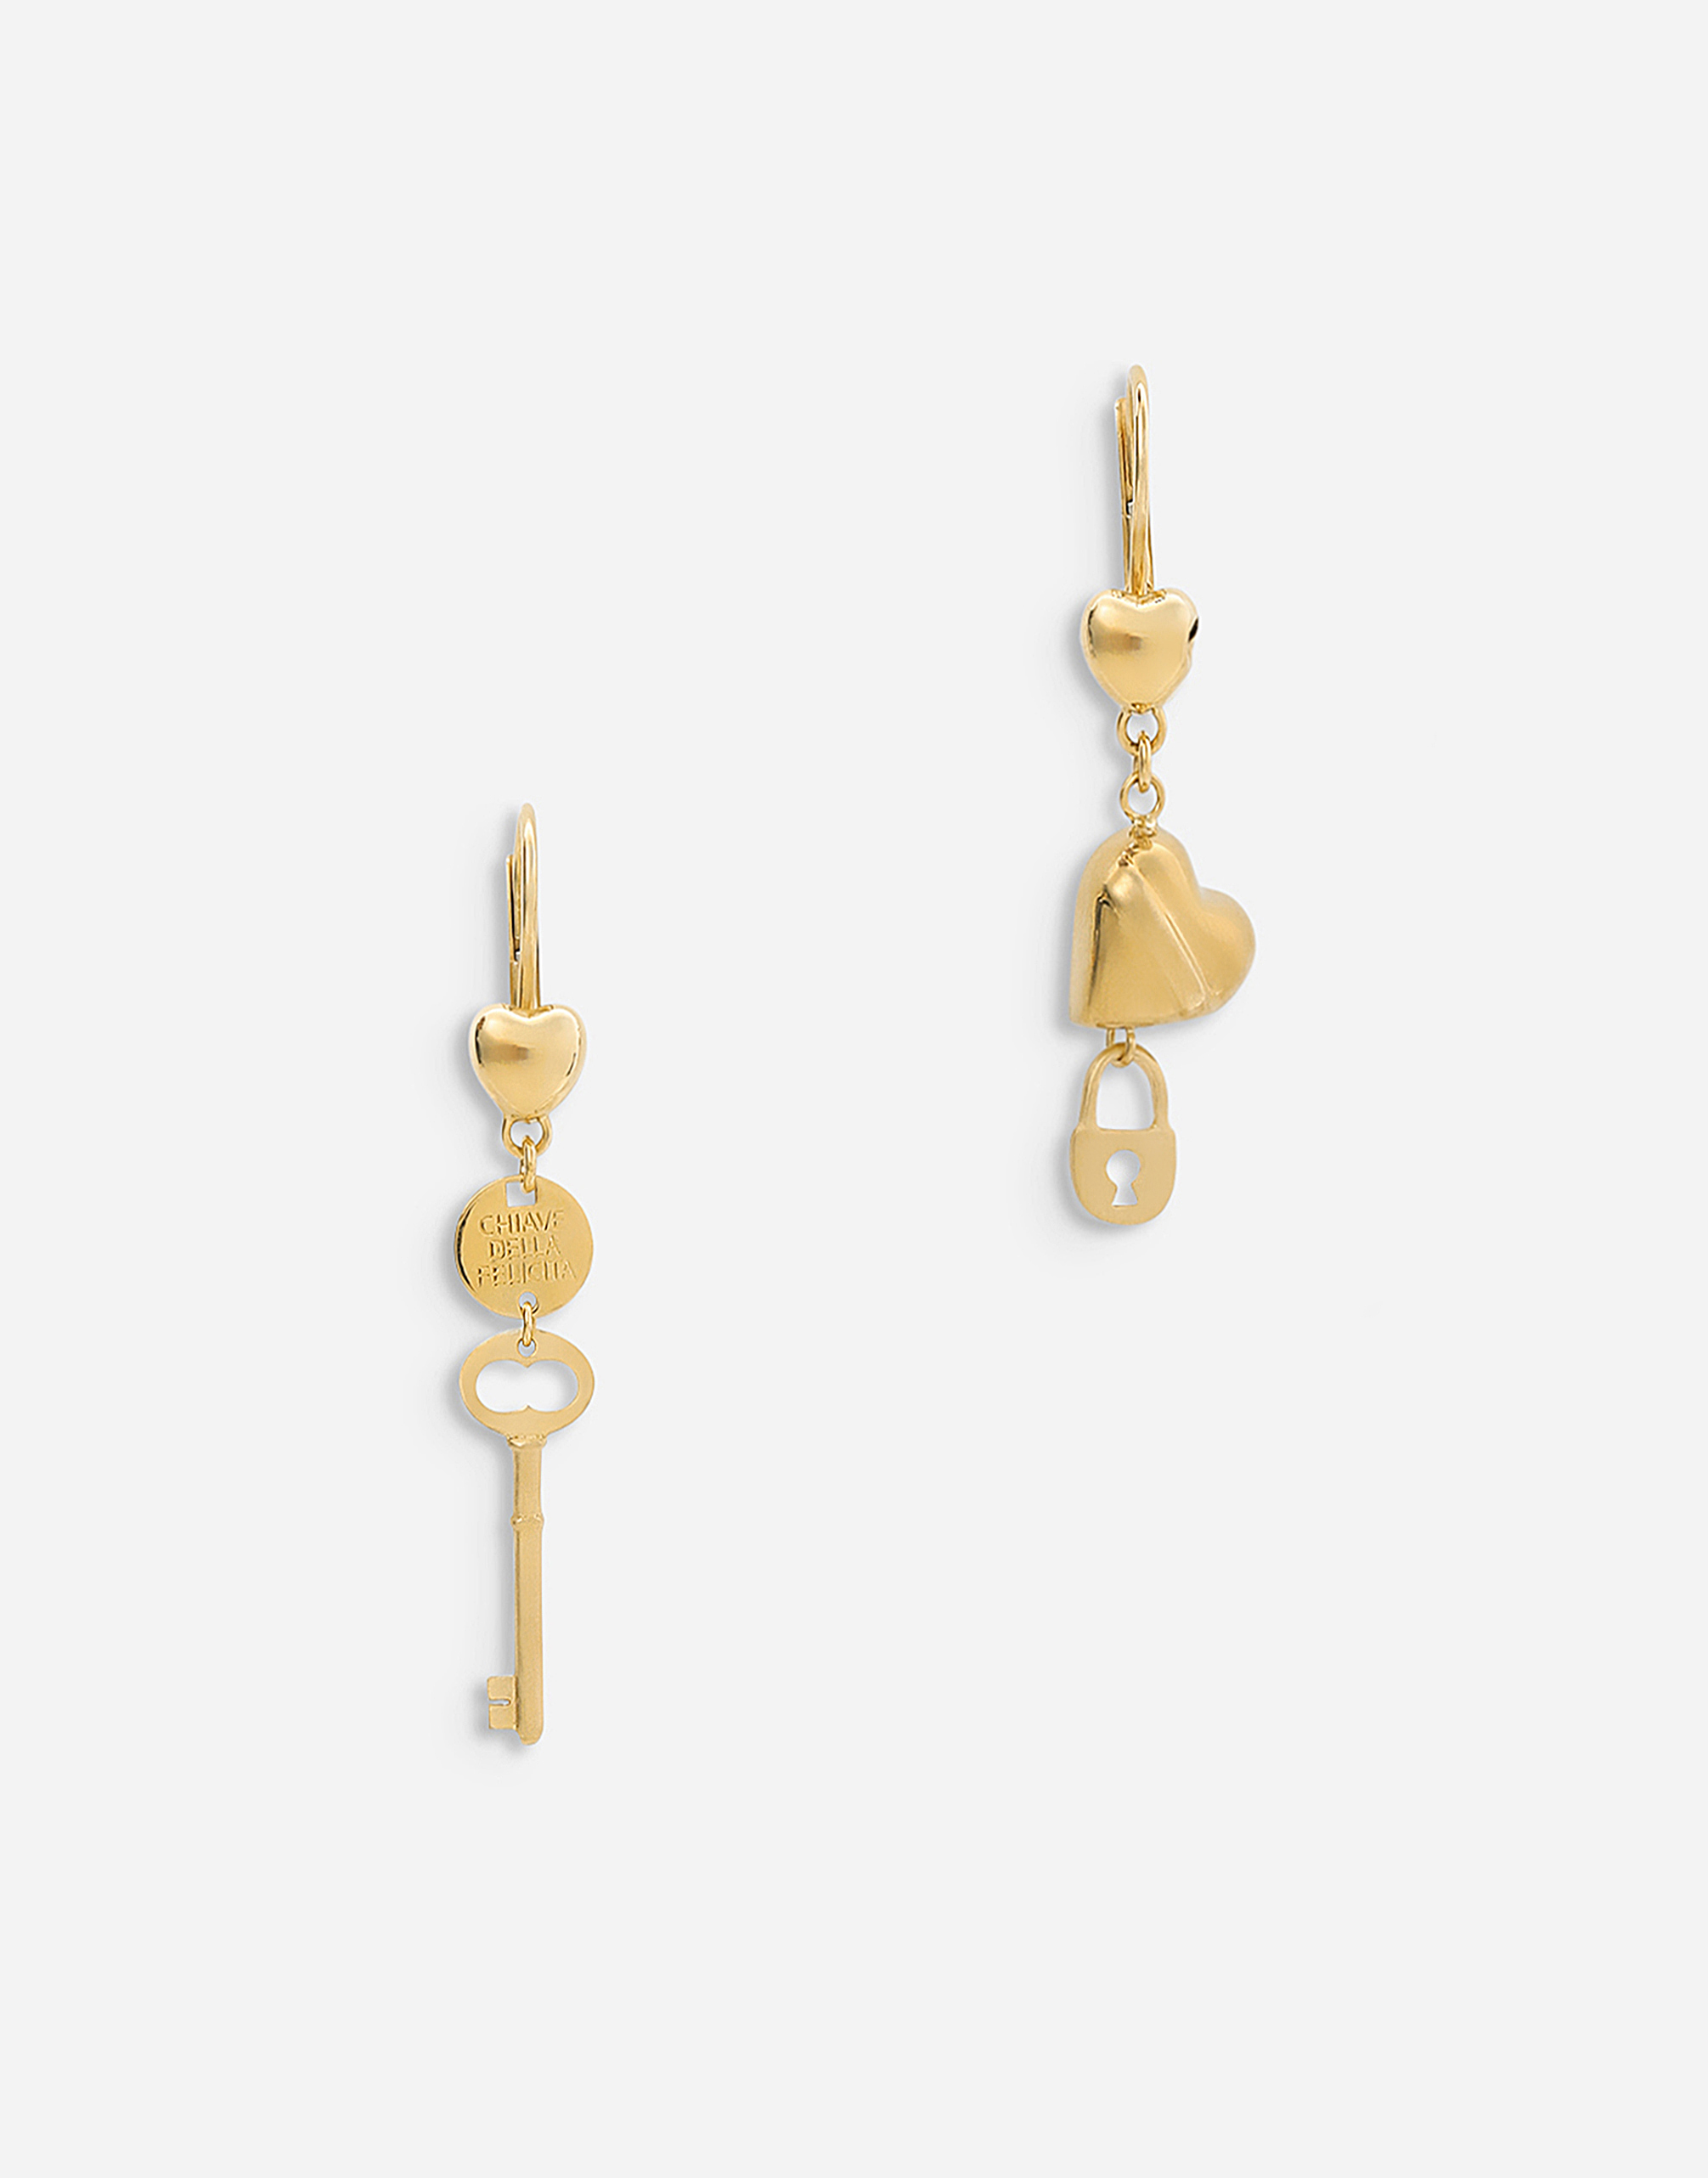 Good Luck earrings in yellow 18kt gold with heart, padlock and key in Gold